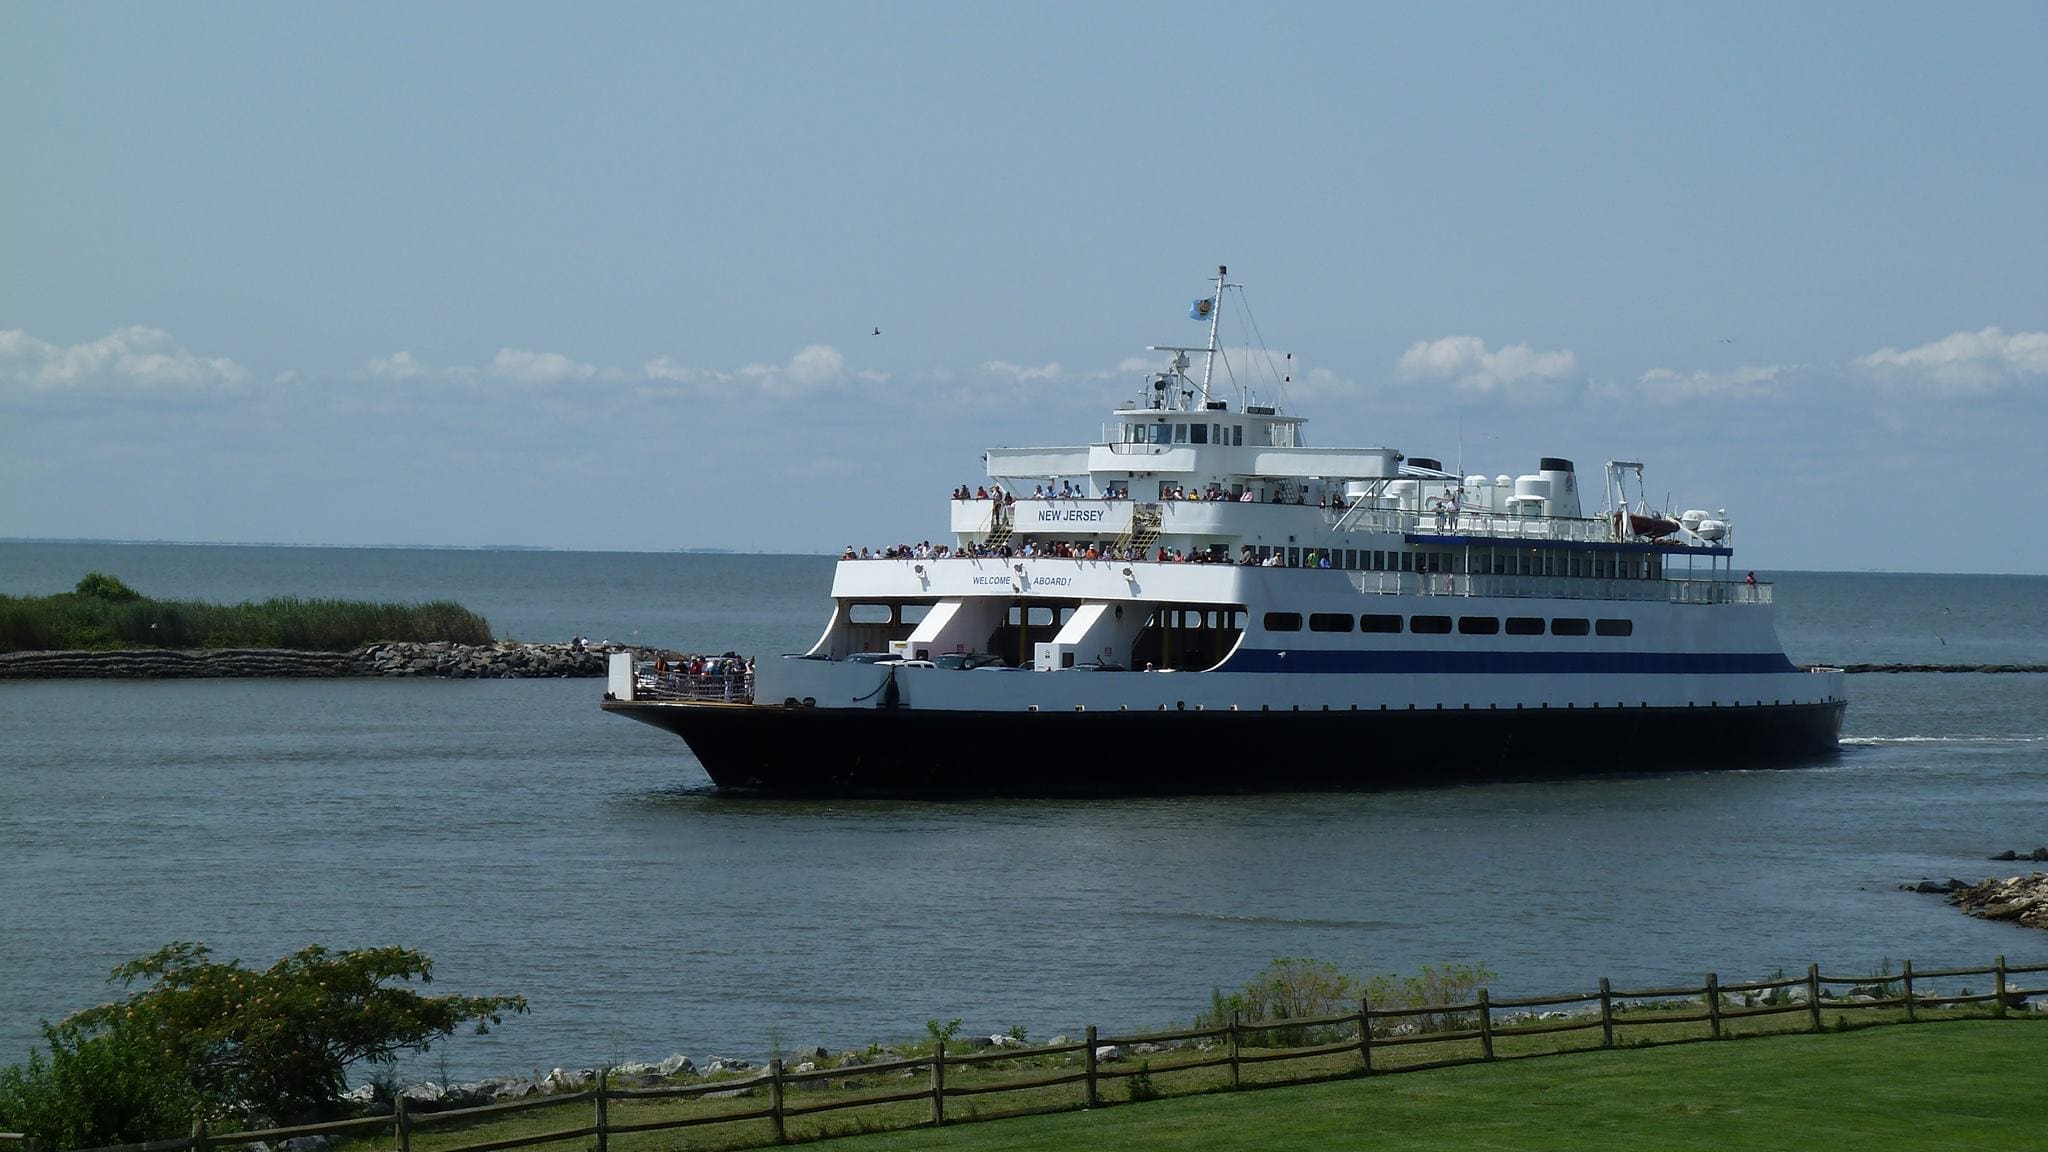 Featured image for “Cape May-Lewes Ferry ticket sales exceed pre-pandemic levels”